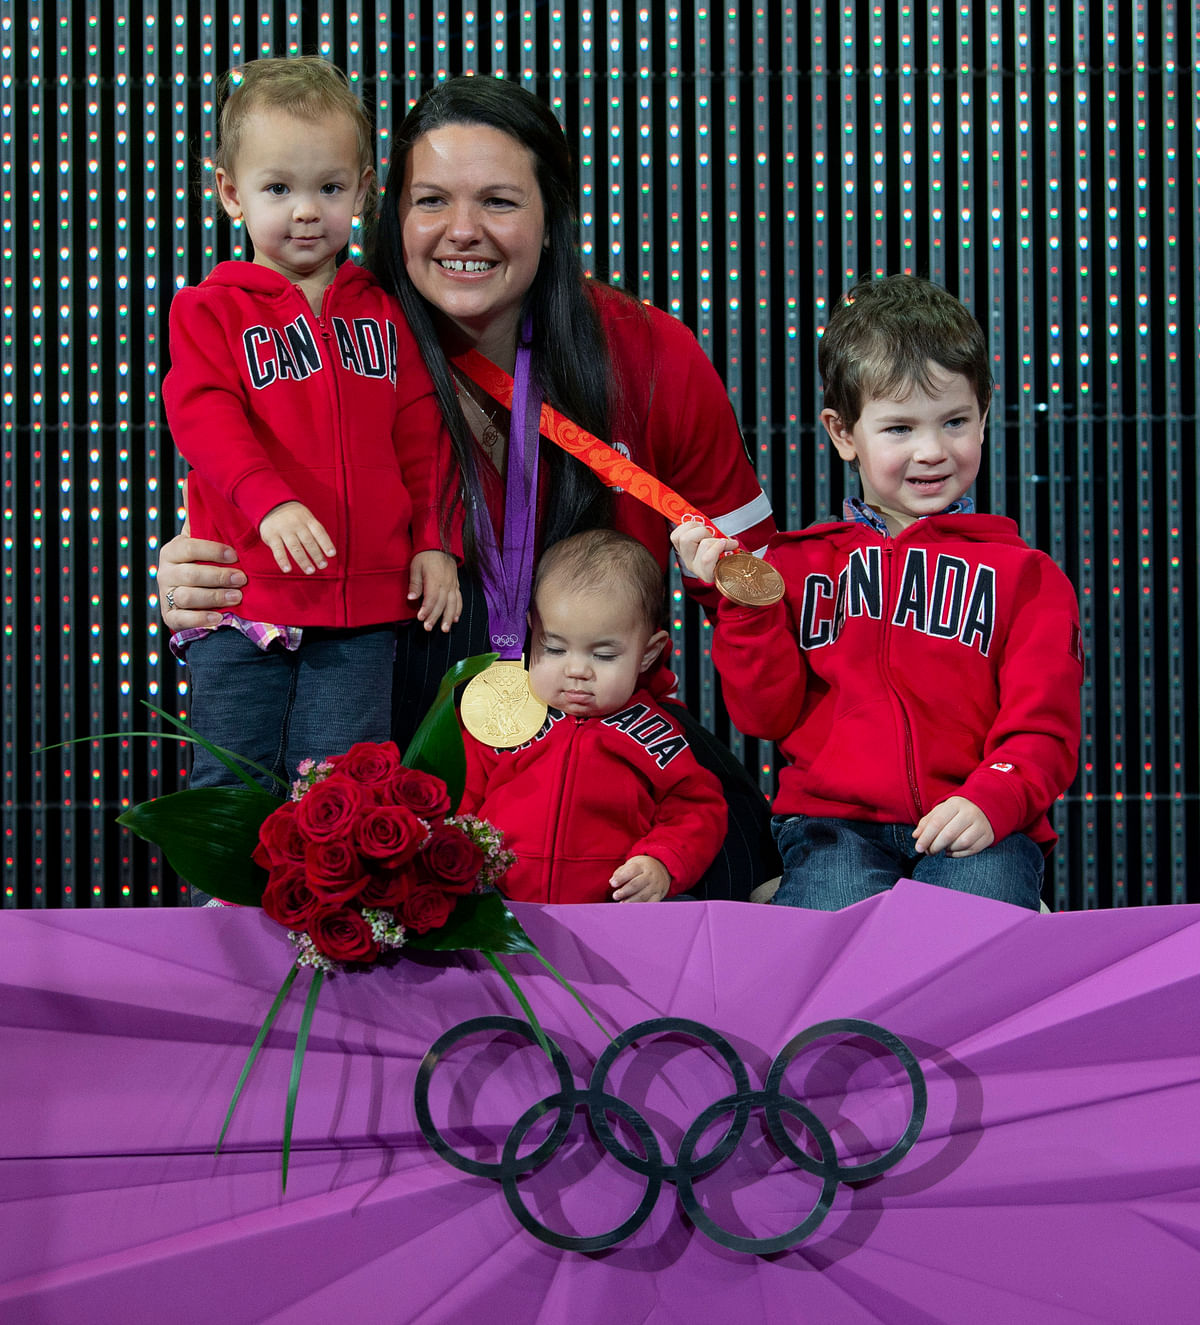 Canadian weightlifter Christine Girard received a 2012 London Olympic gold and 2008 Beijing Olympic bronze medal.